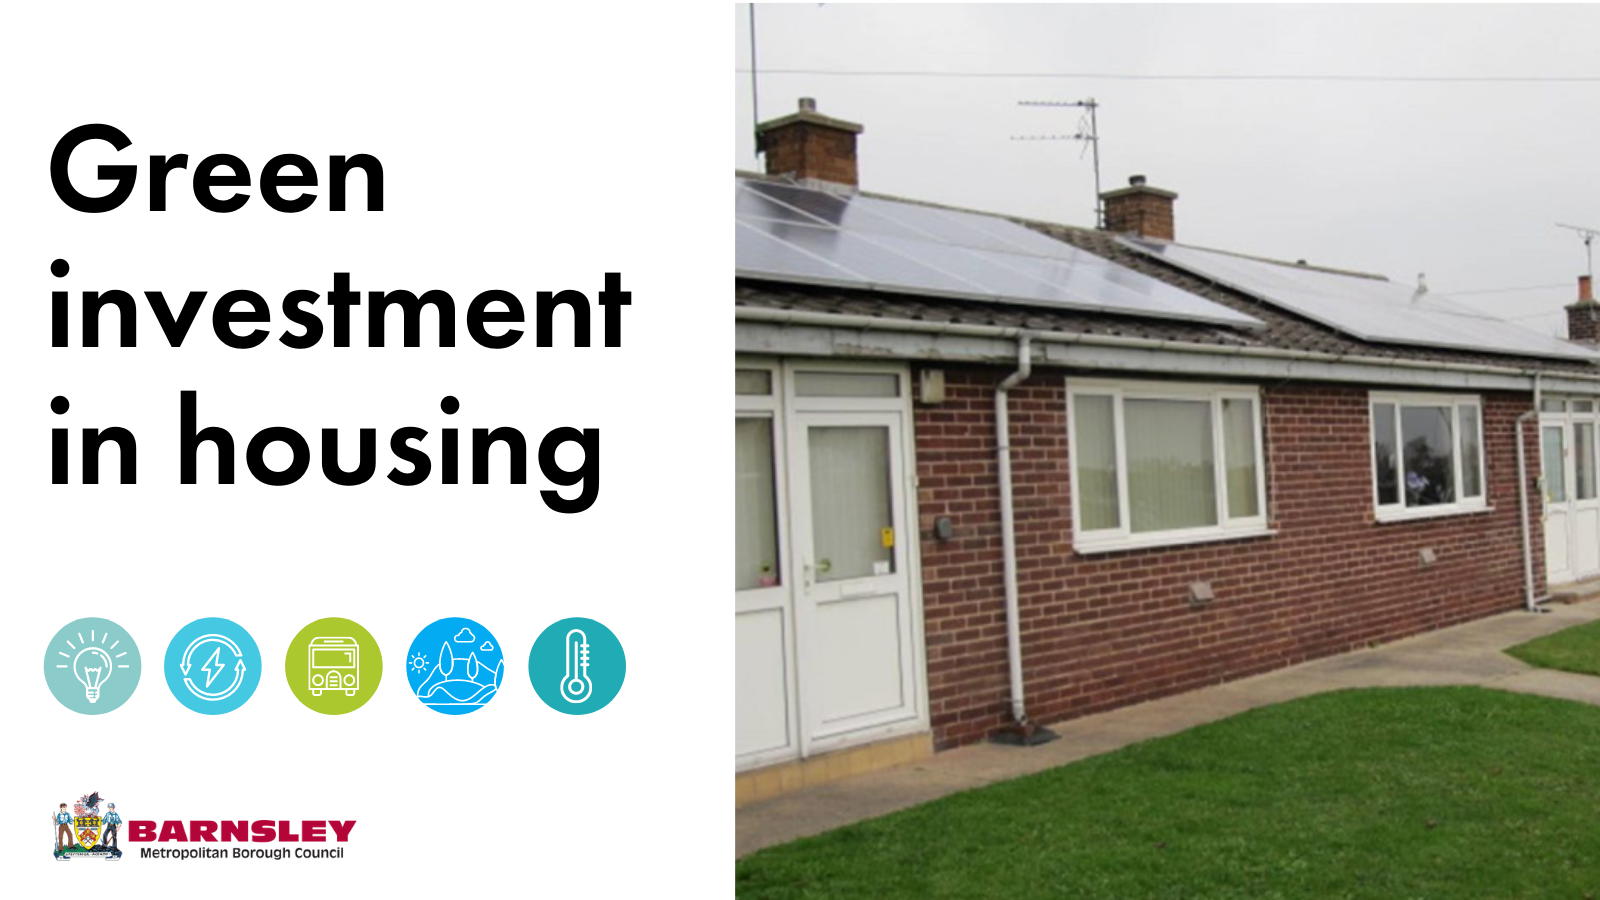 Green investment in housing